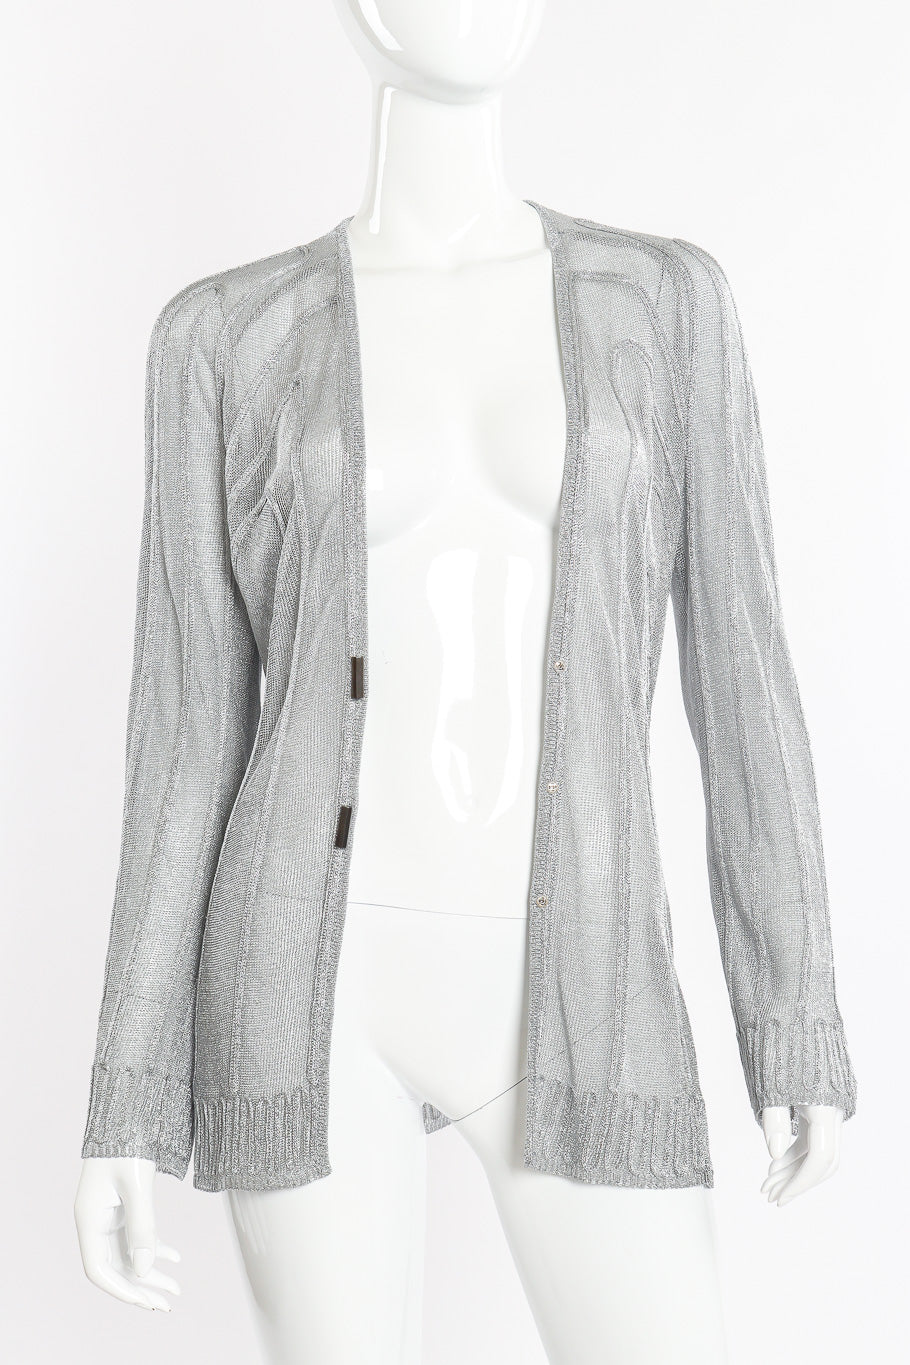 Vintage Thierry Mugler Metallic Cable Knit Cardigan front view on mannequin open @Recessla